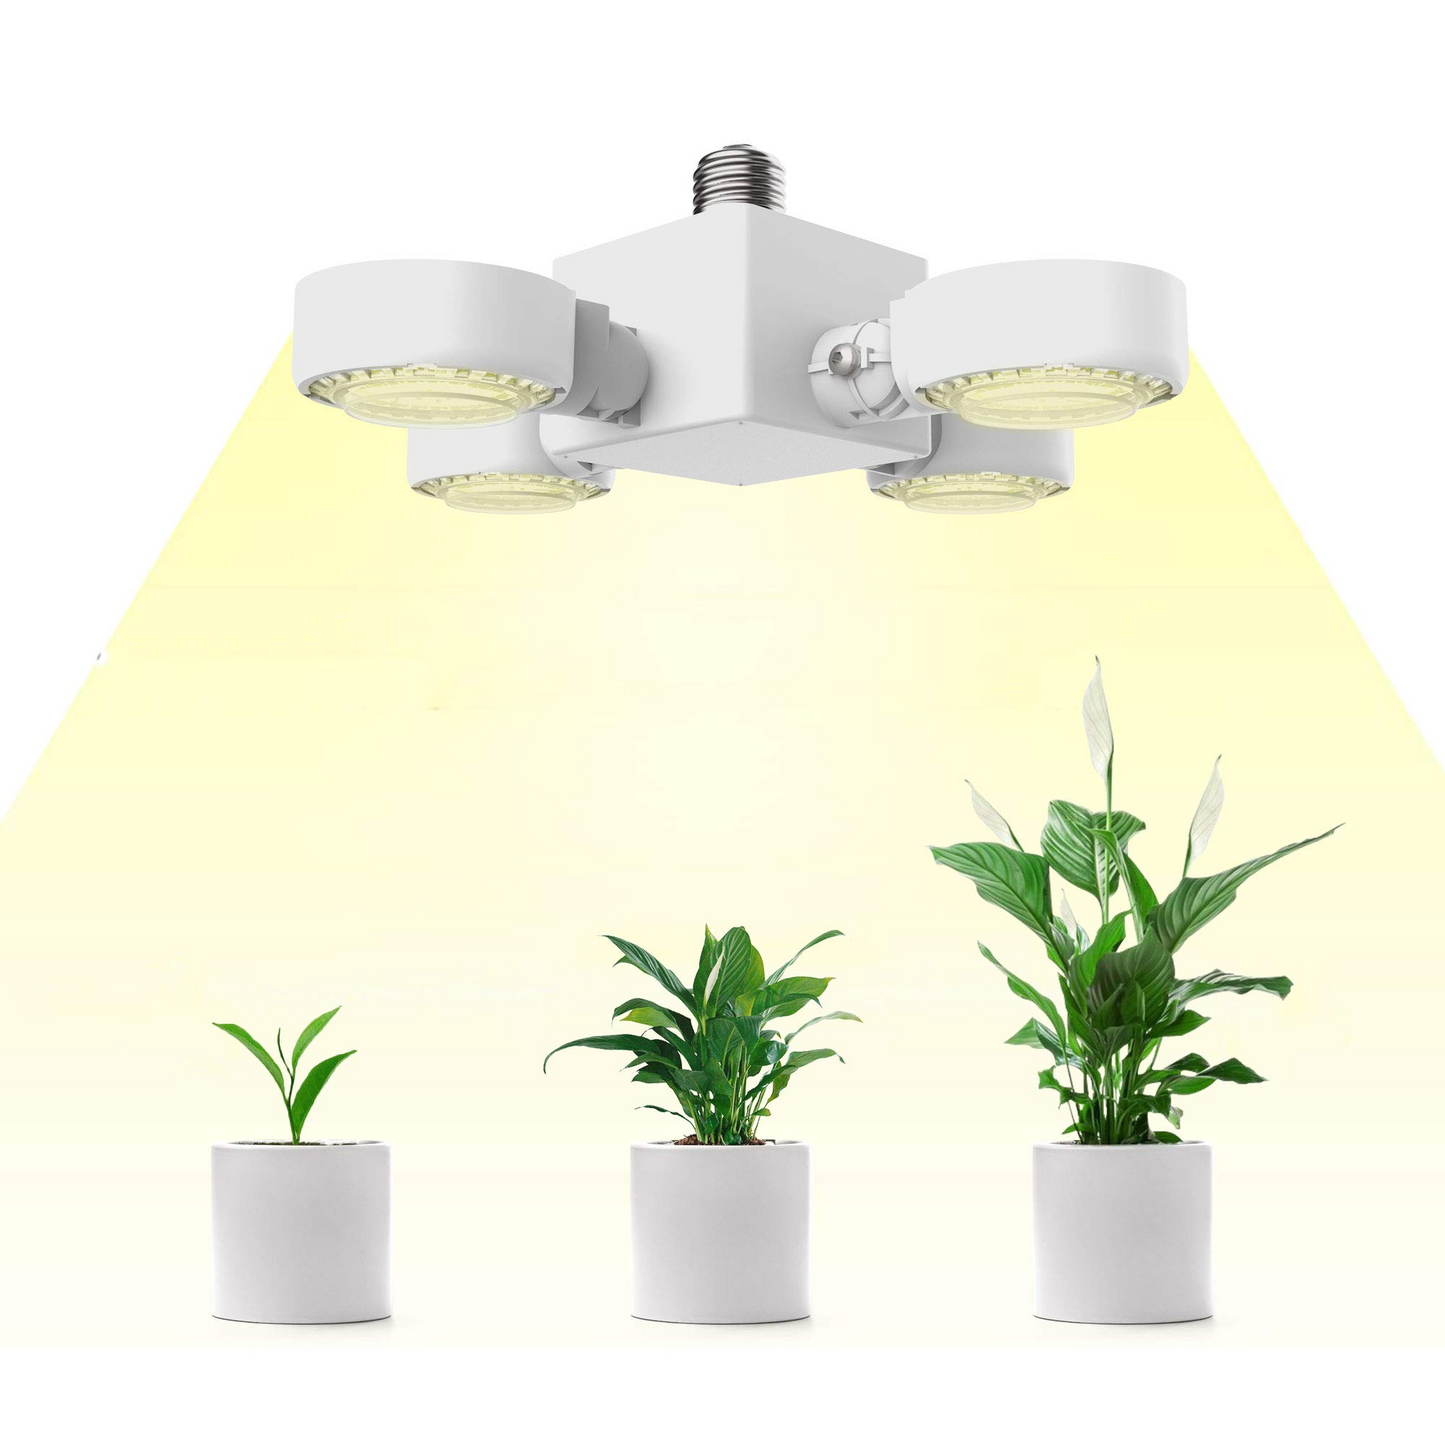 SANSI Grow Light Wing Style 30Watts, Full Spectrum, Perfect for Seeding and Growing of Indoor Plants